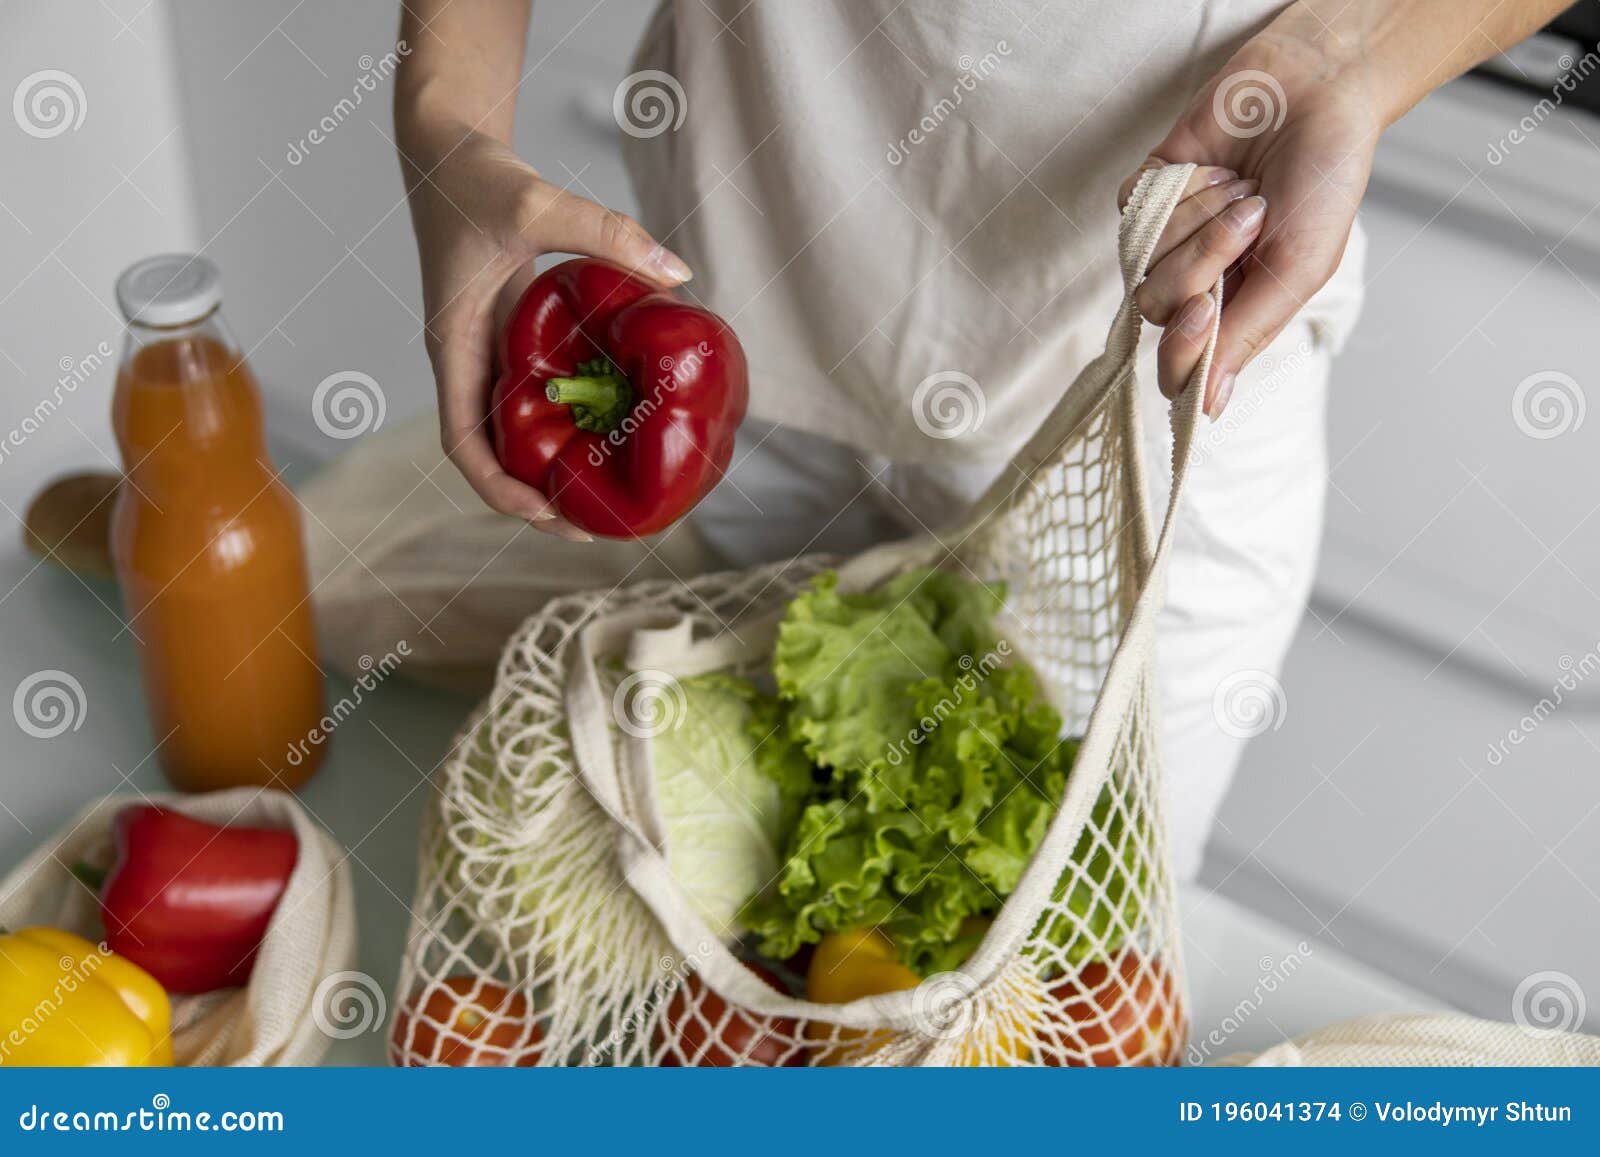 Download 230 Pepper Yellow Red Plastic Bag Photos Free Royalty Free Stock Photos From Dreamstime Yellowimages Mockups